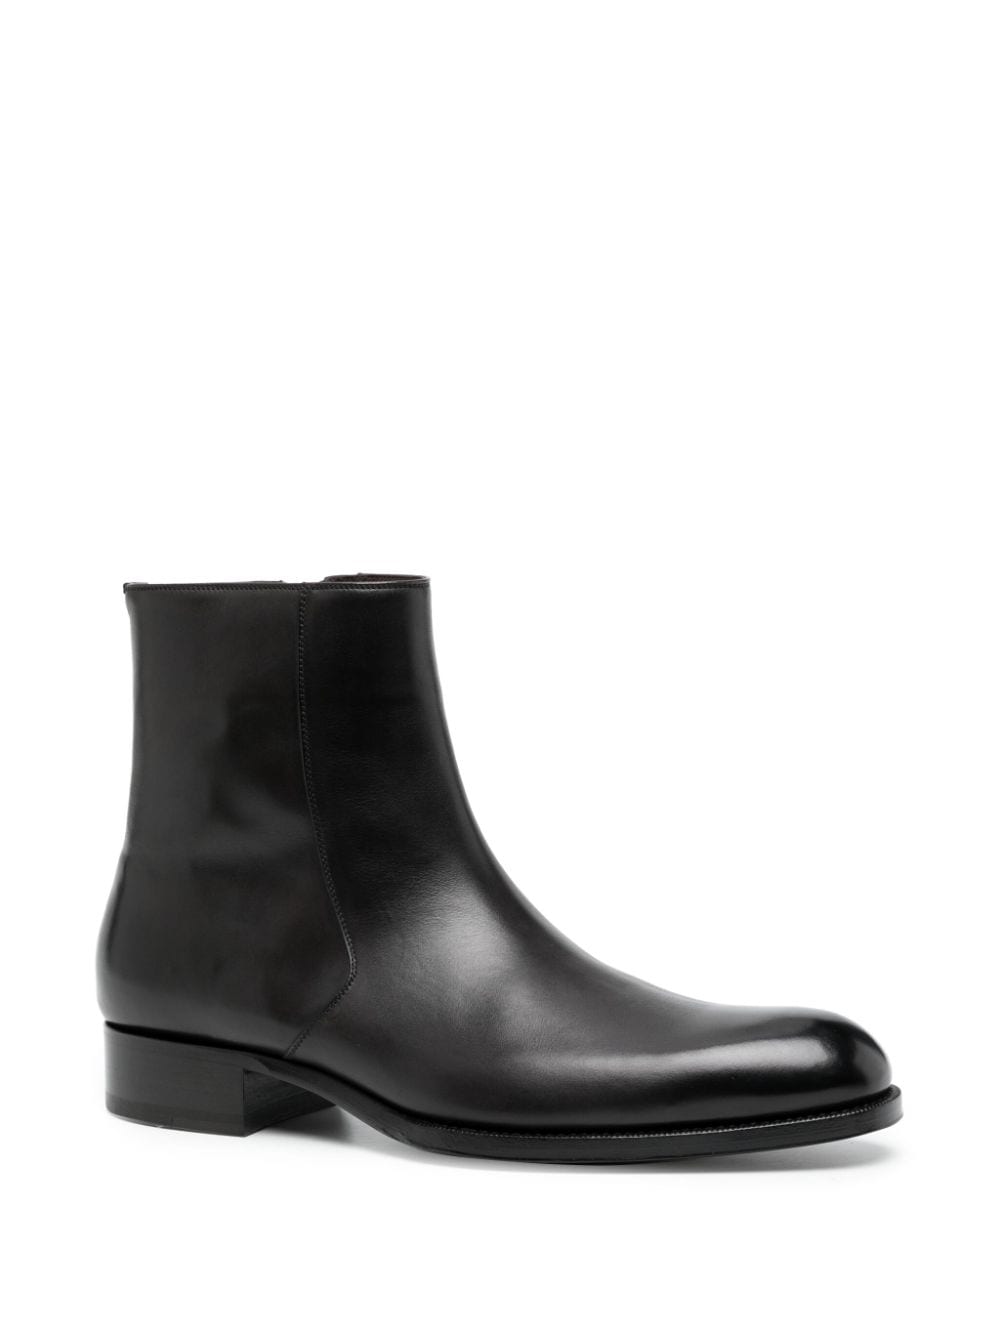 TOM FORD Edgar leather ankle boots - Bruin